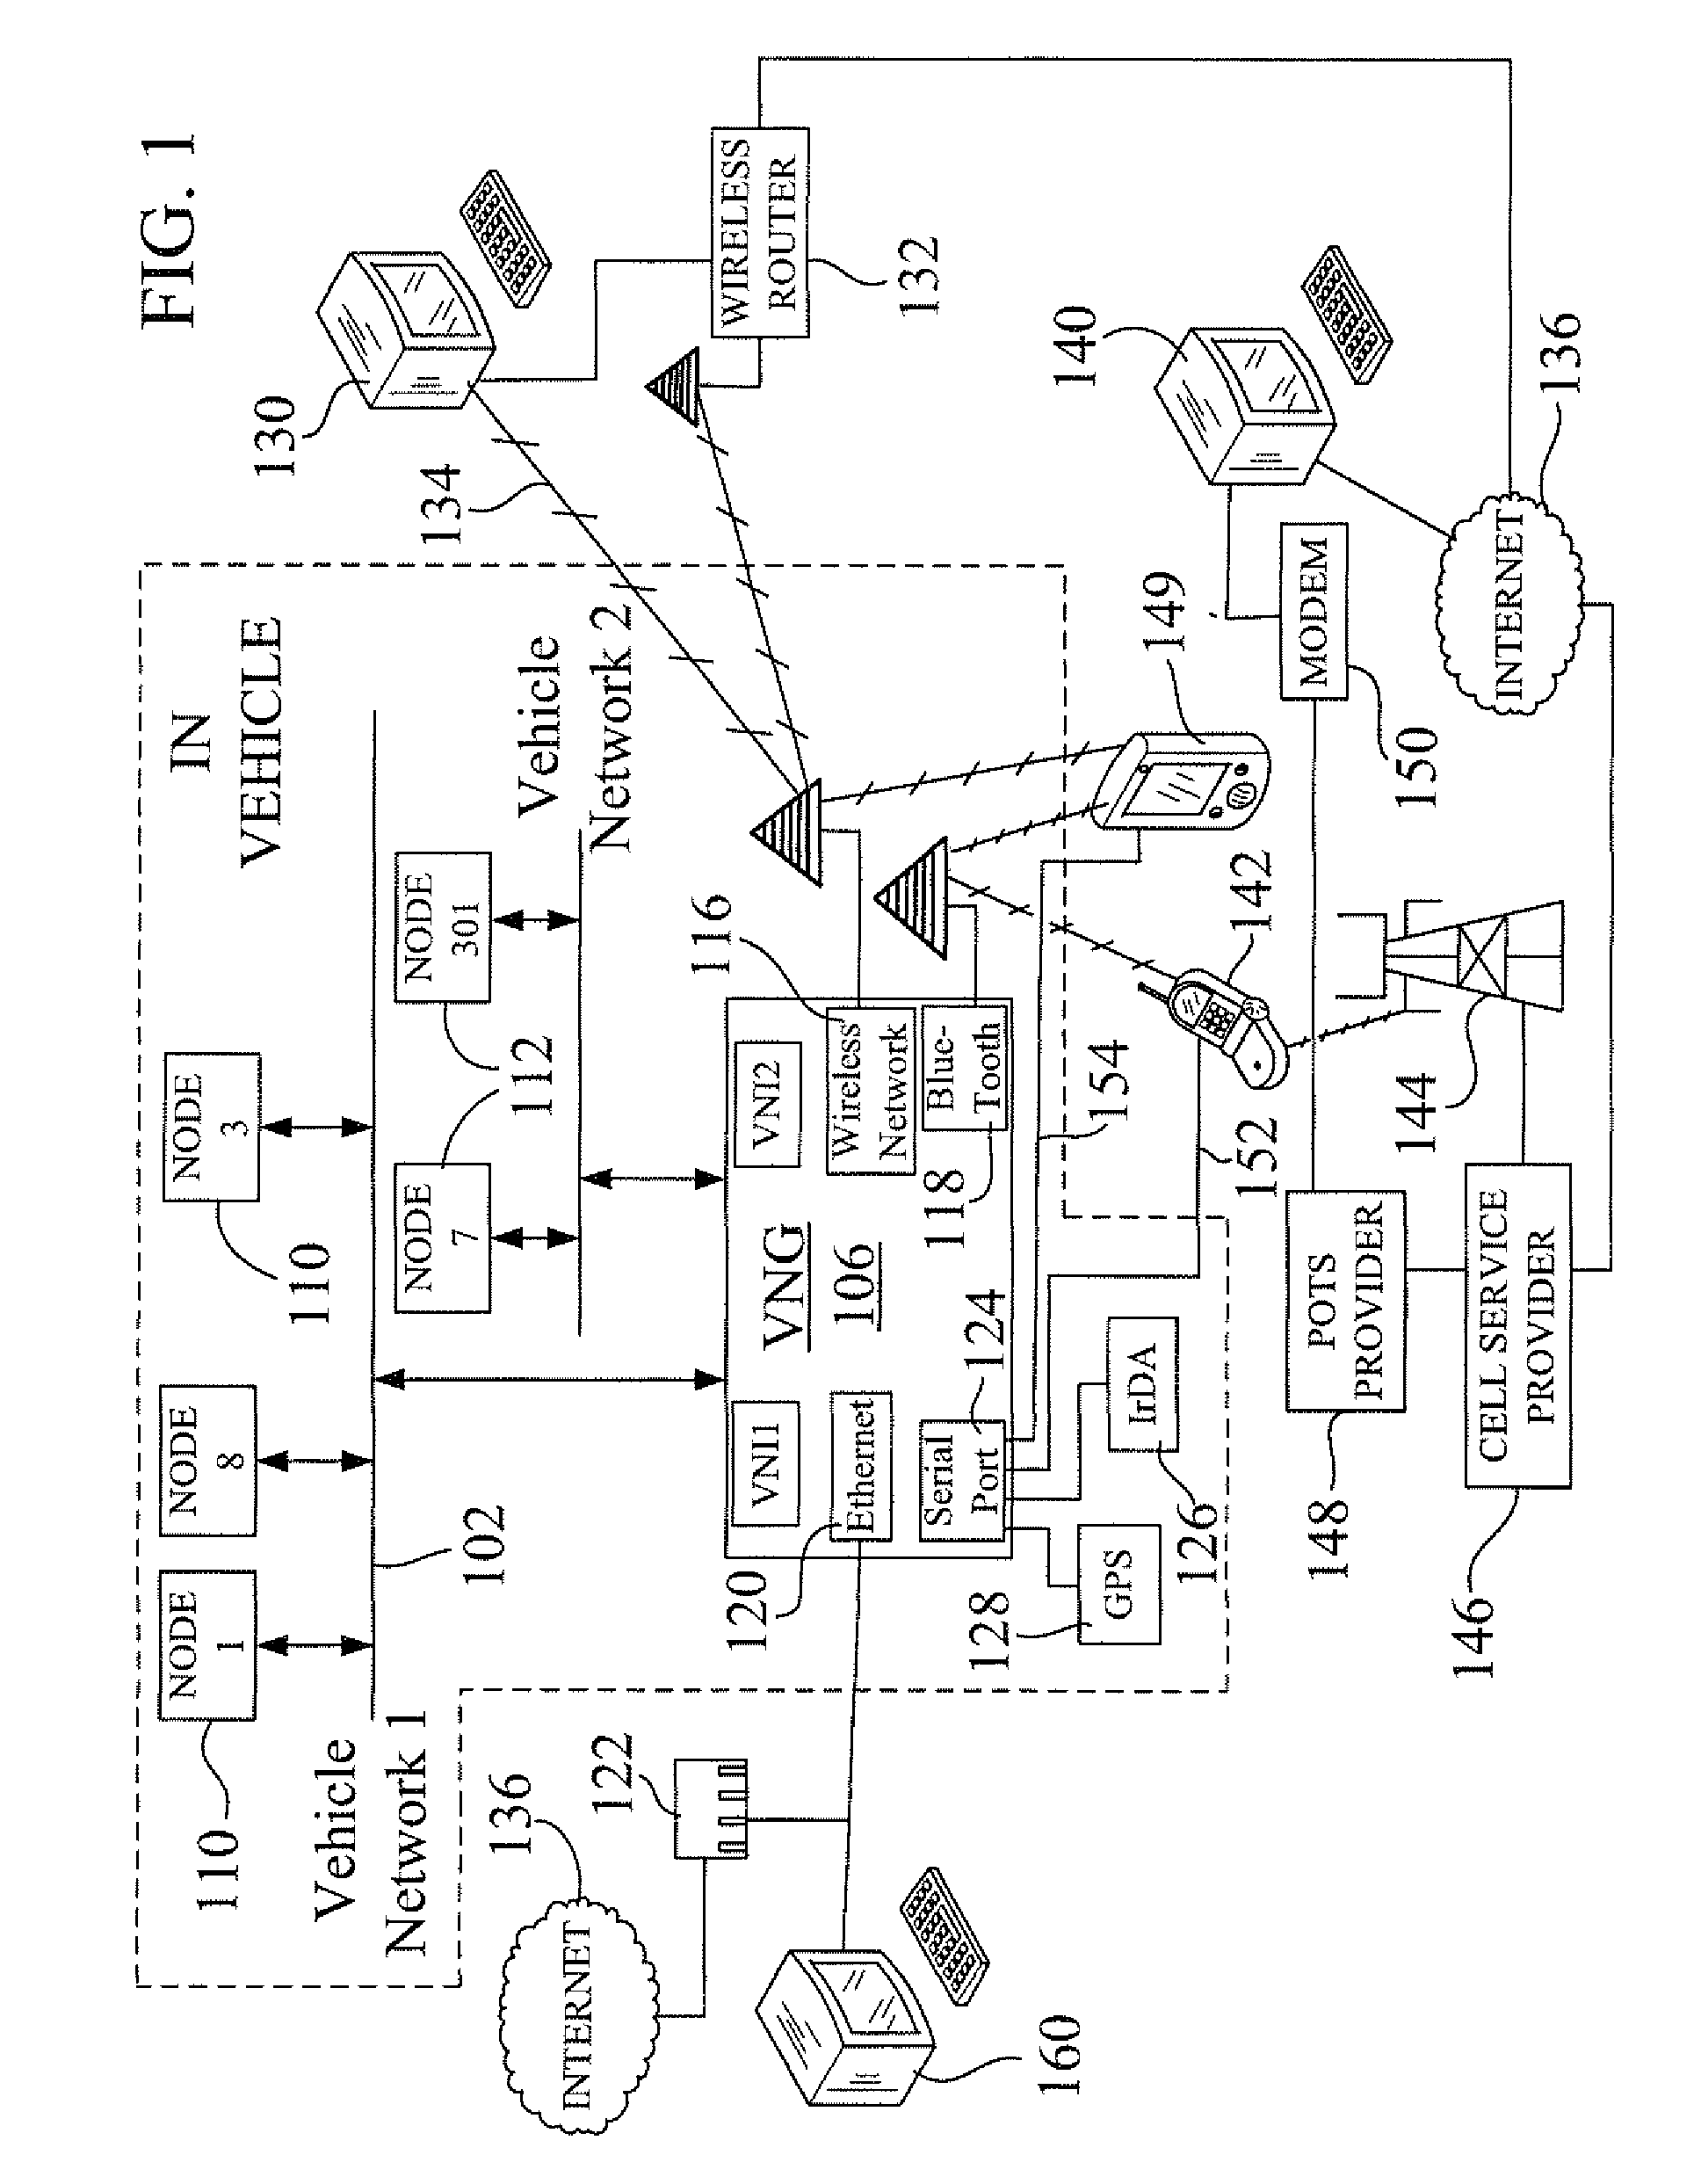 Wireless Gateway Apparatus and Method of Bridging Data Between Vehicle Based and External Data Networks